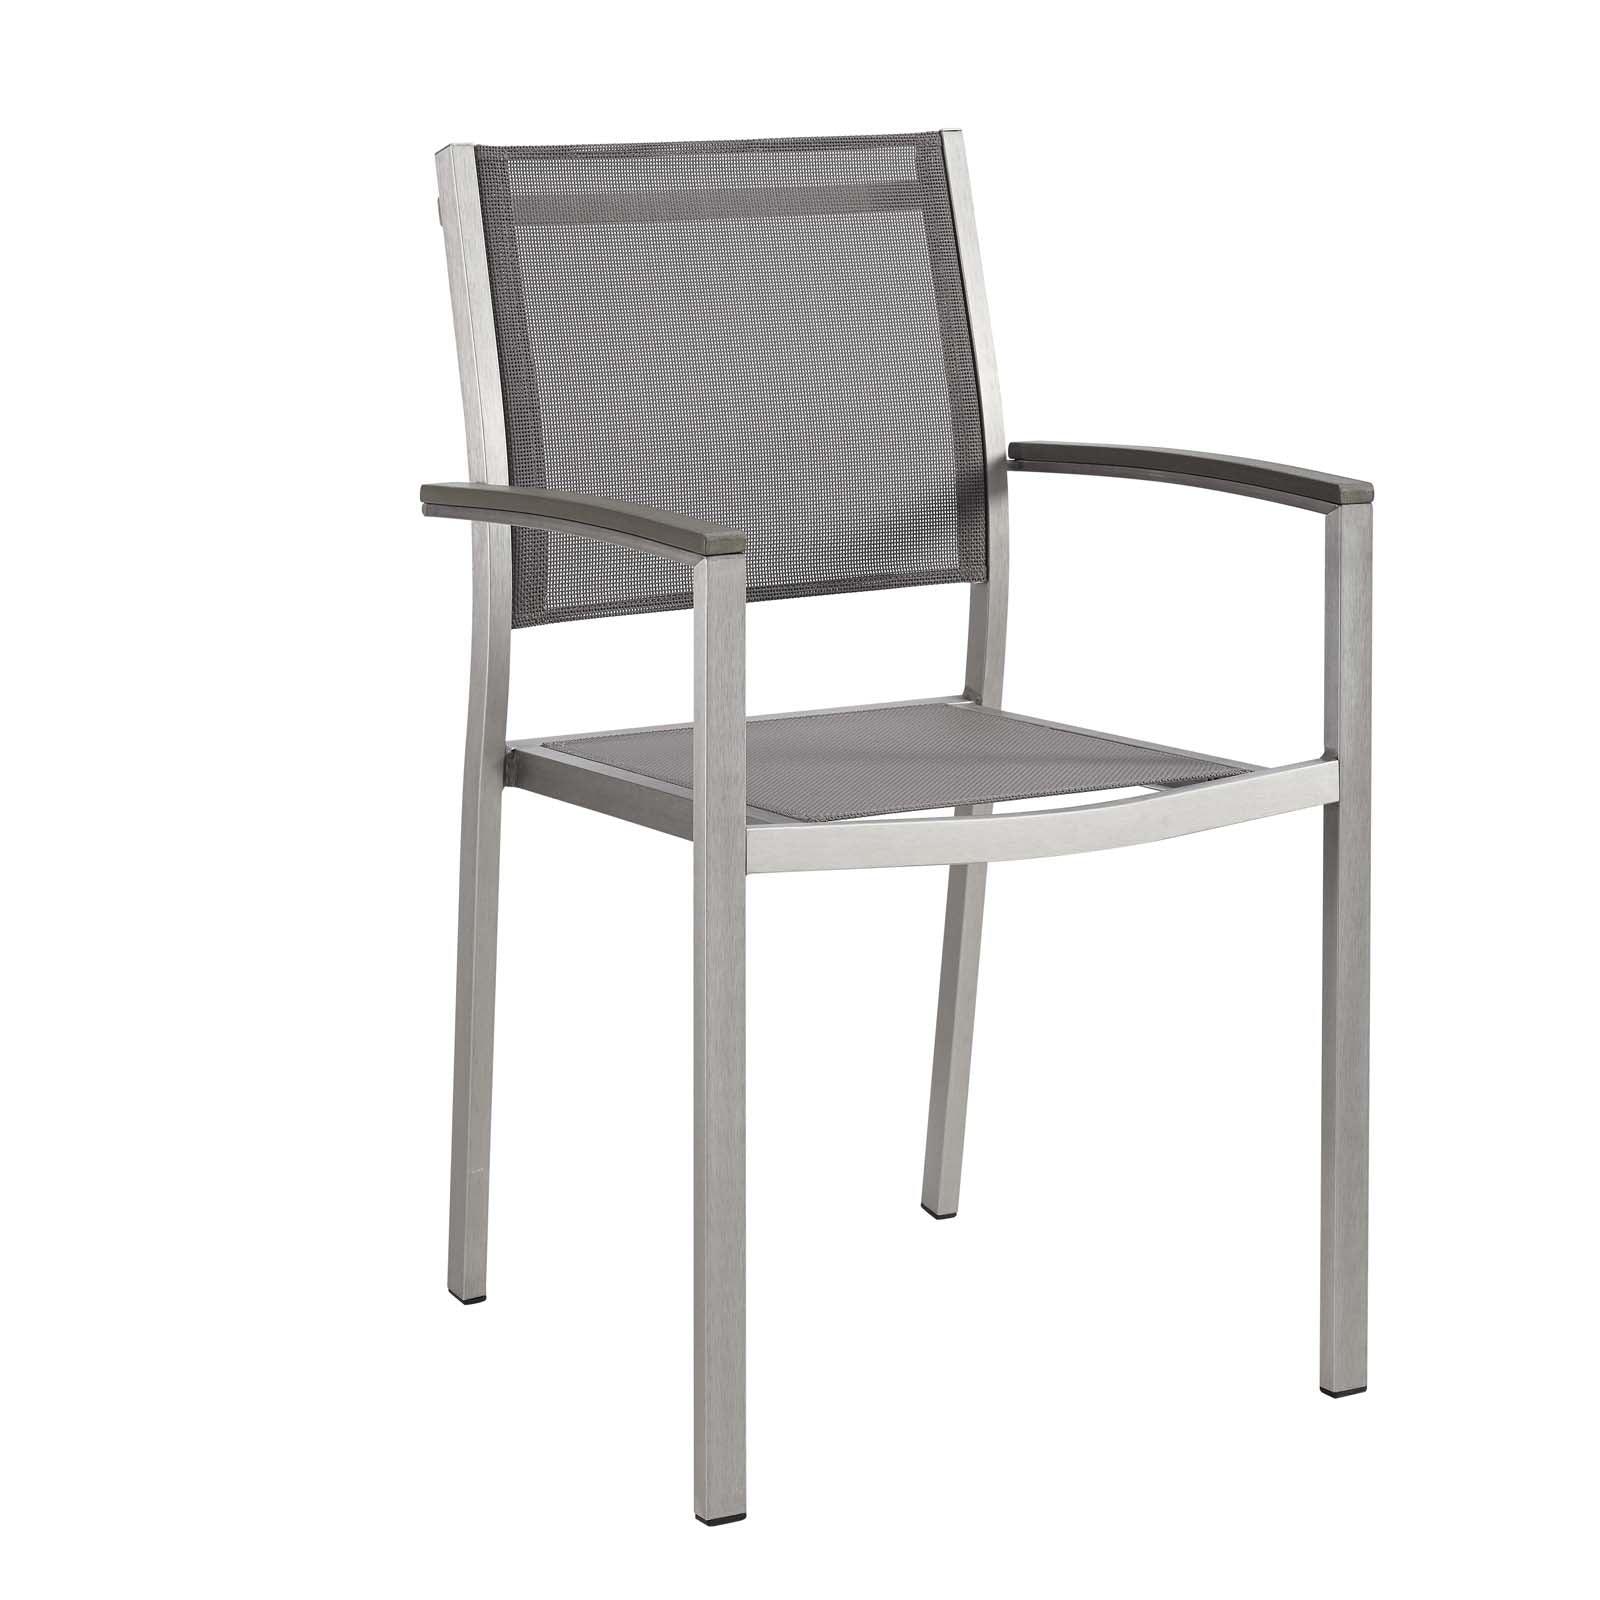 Modway Shore Outdoor Patio Aluminum Dining Chair FredCo